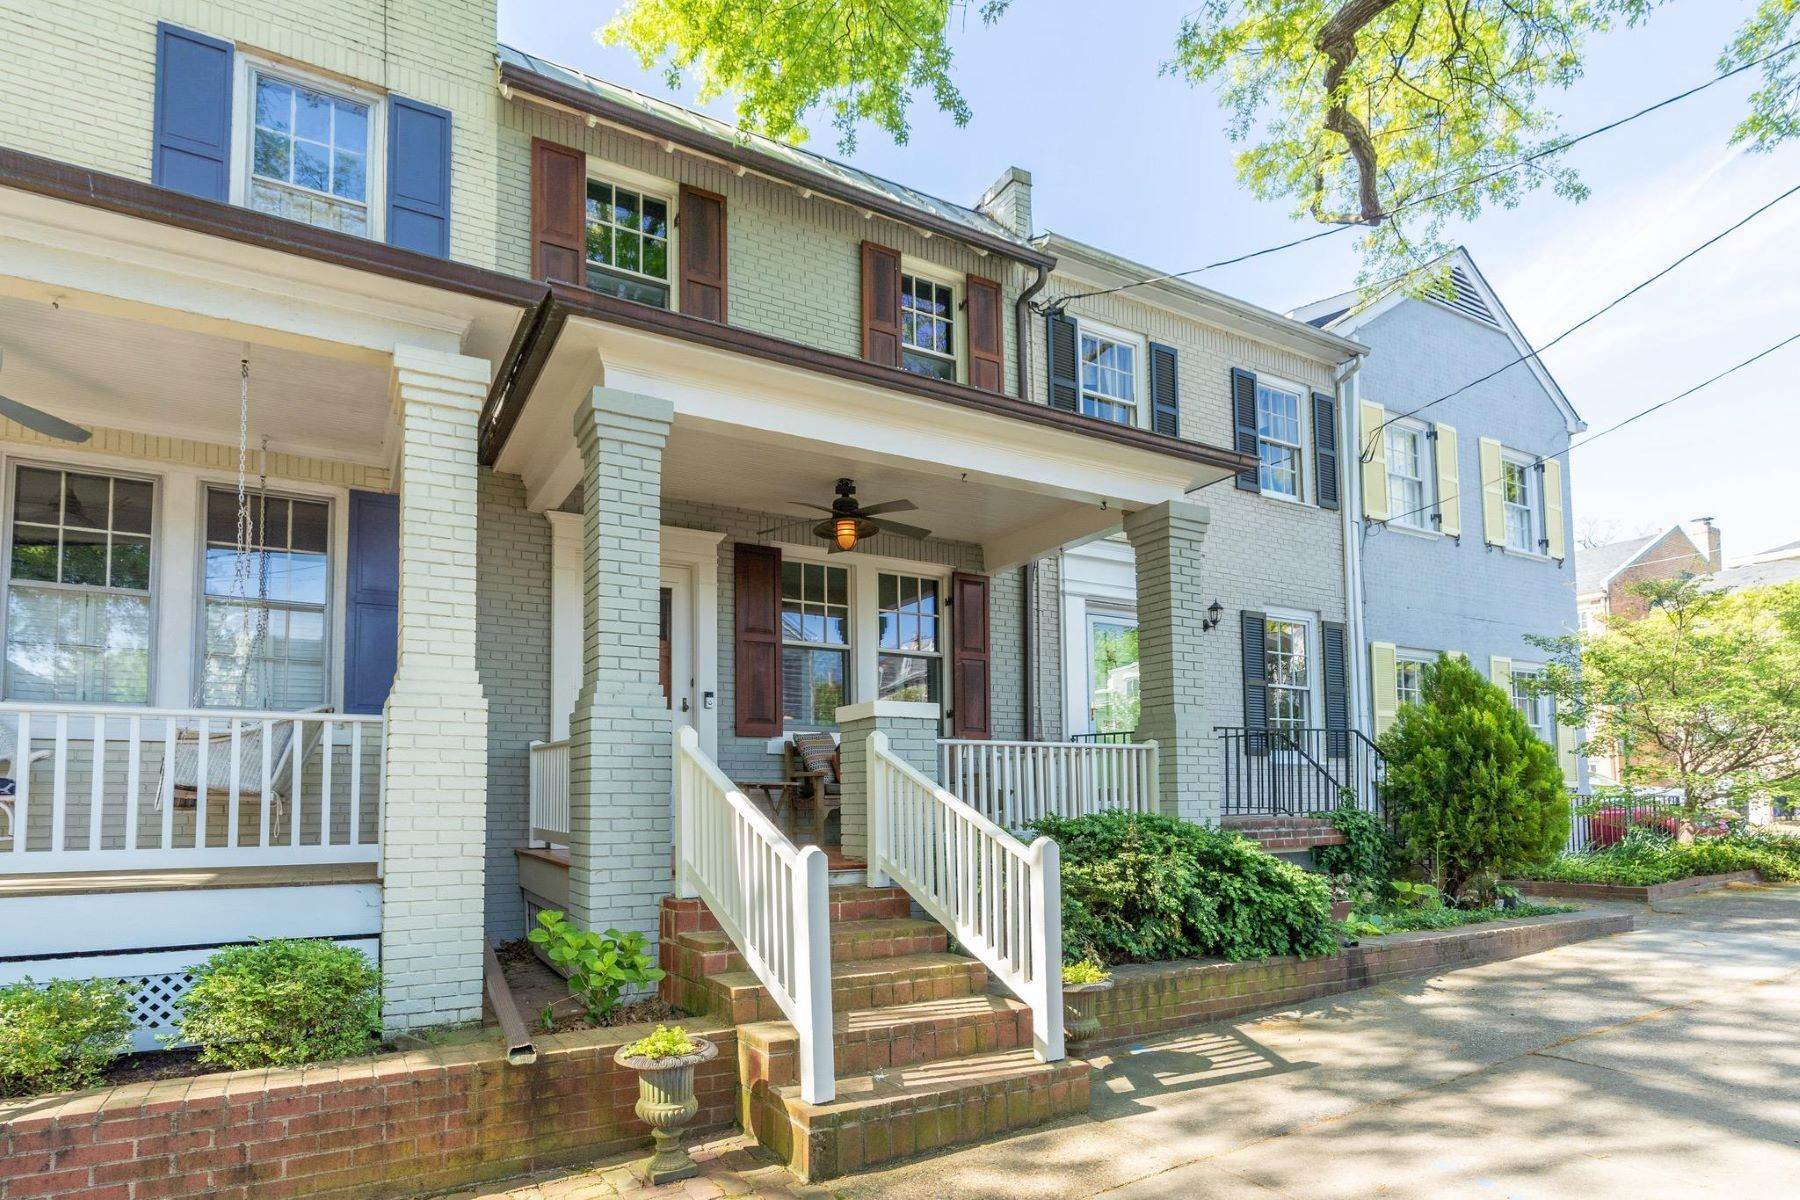 Other Residential Homes for Sale at 426 Wolfe St Alexandria, Virginia 22314 United States